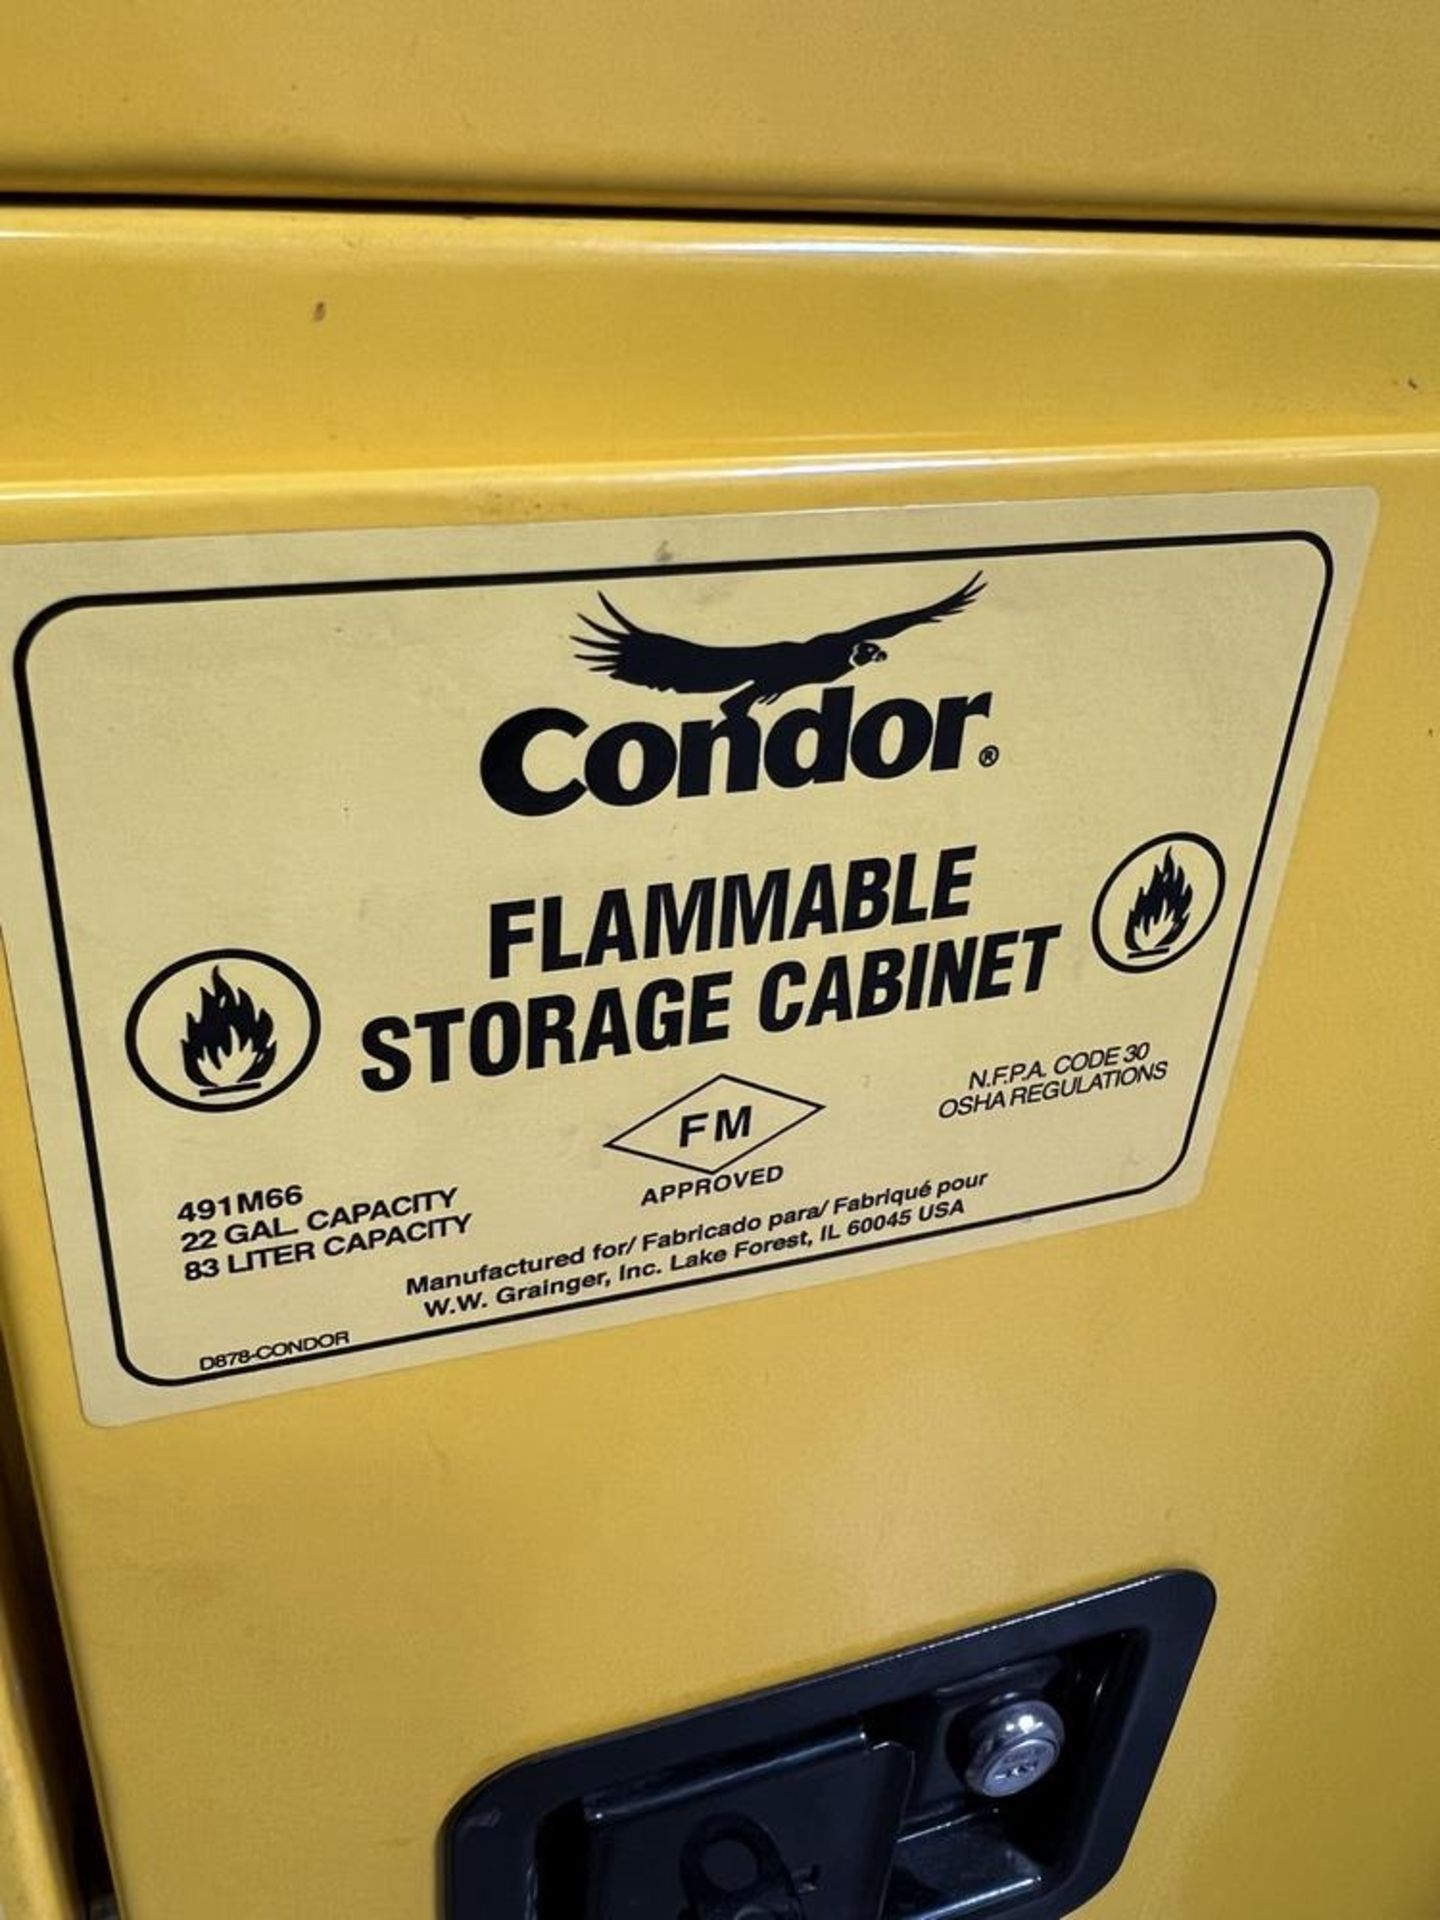 Condor 22 Gal Capacity Flammables Storage Cabinet - Image 2 of 3